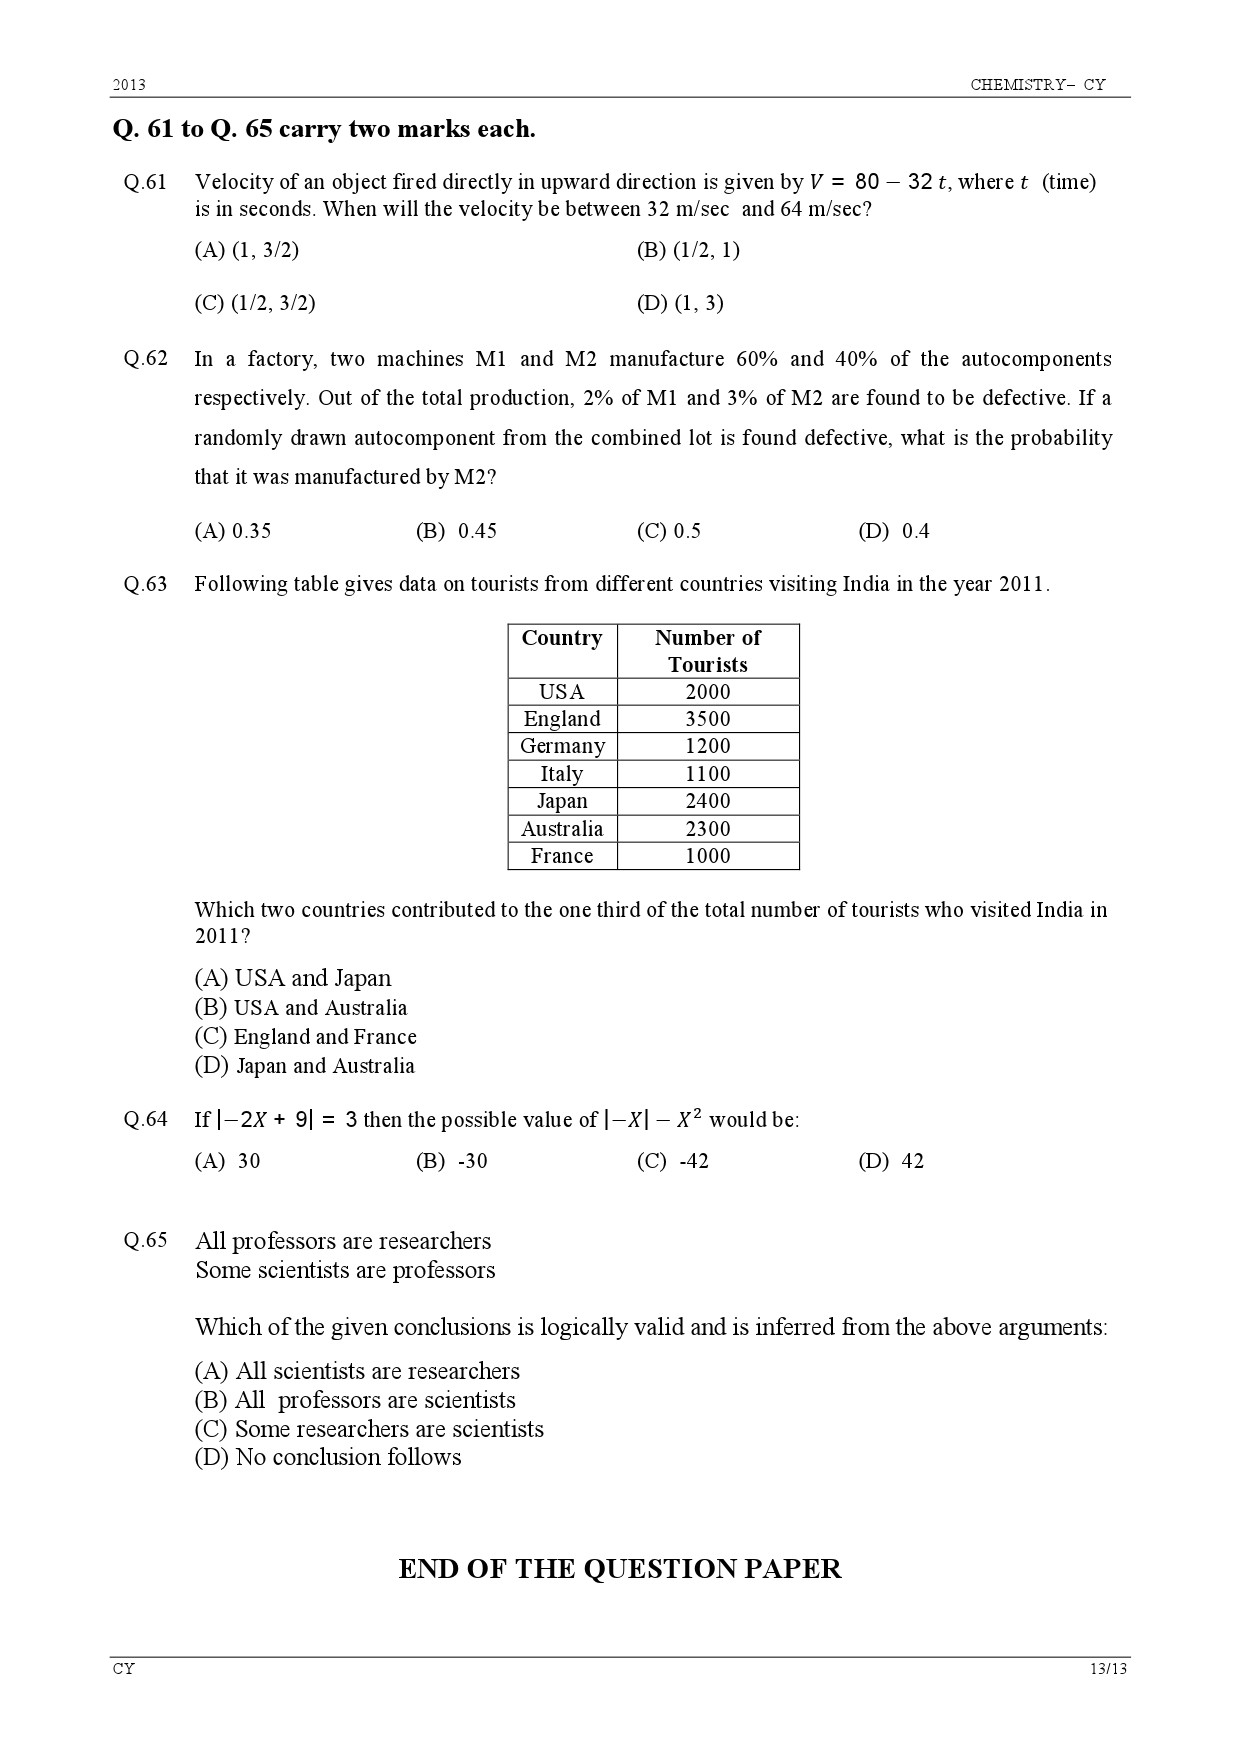 GATE Exam Question Paper 2013 Chemistry 13